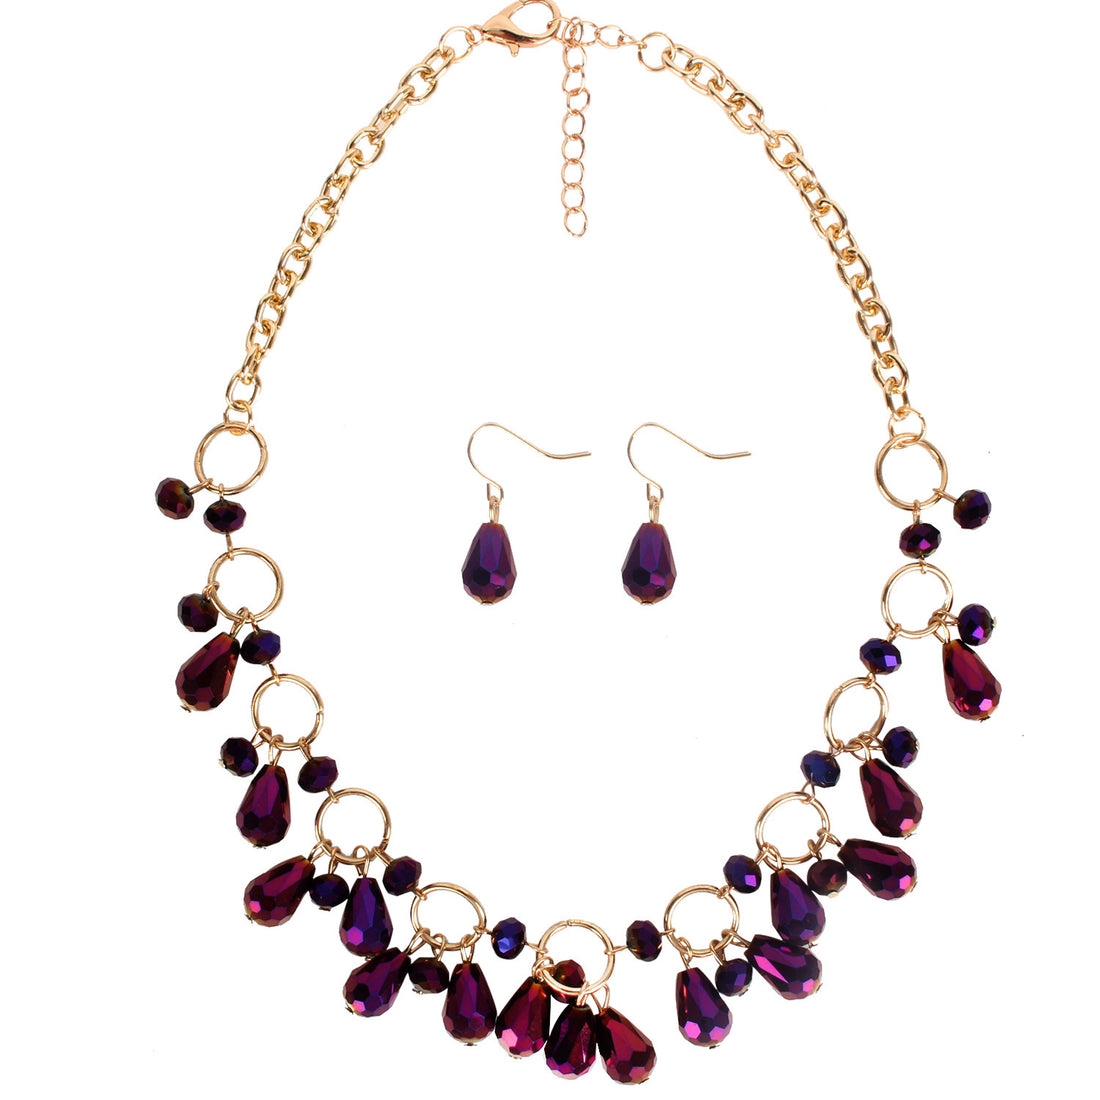 Glorious Droplets, Exaggerated Crystal  Droplet Shape Beaded Necklace and Earrings Set